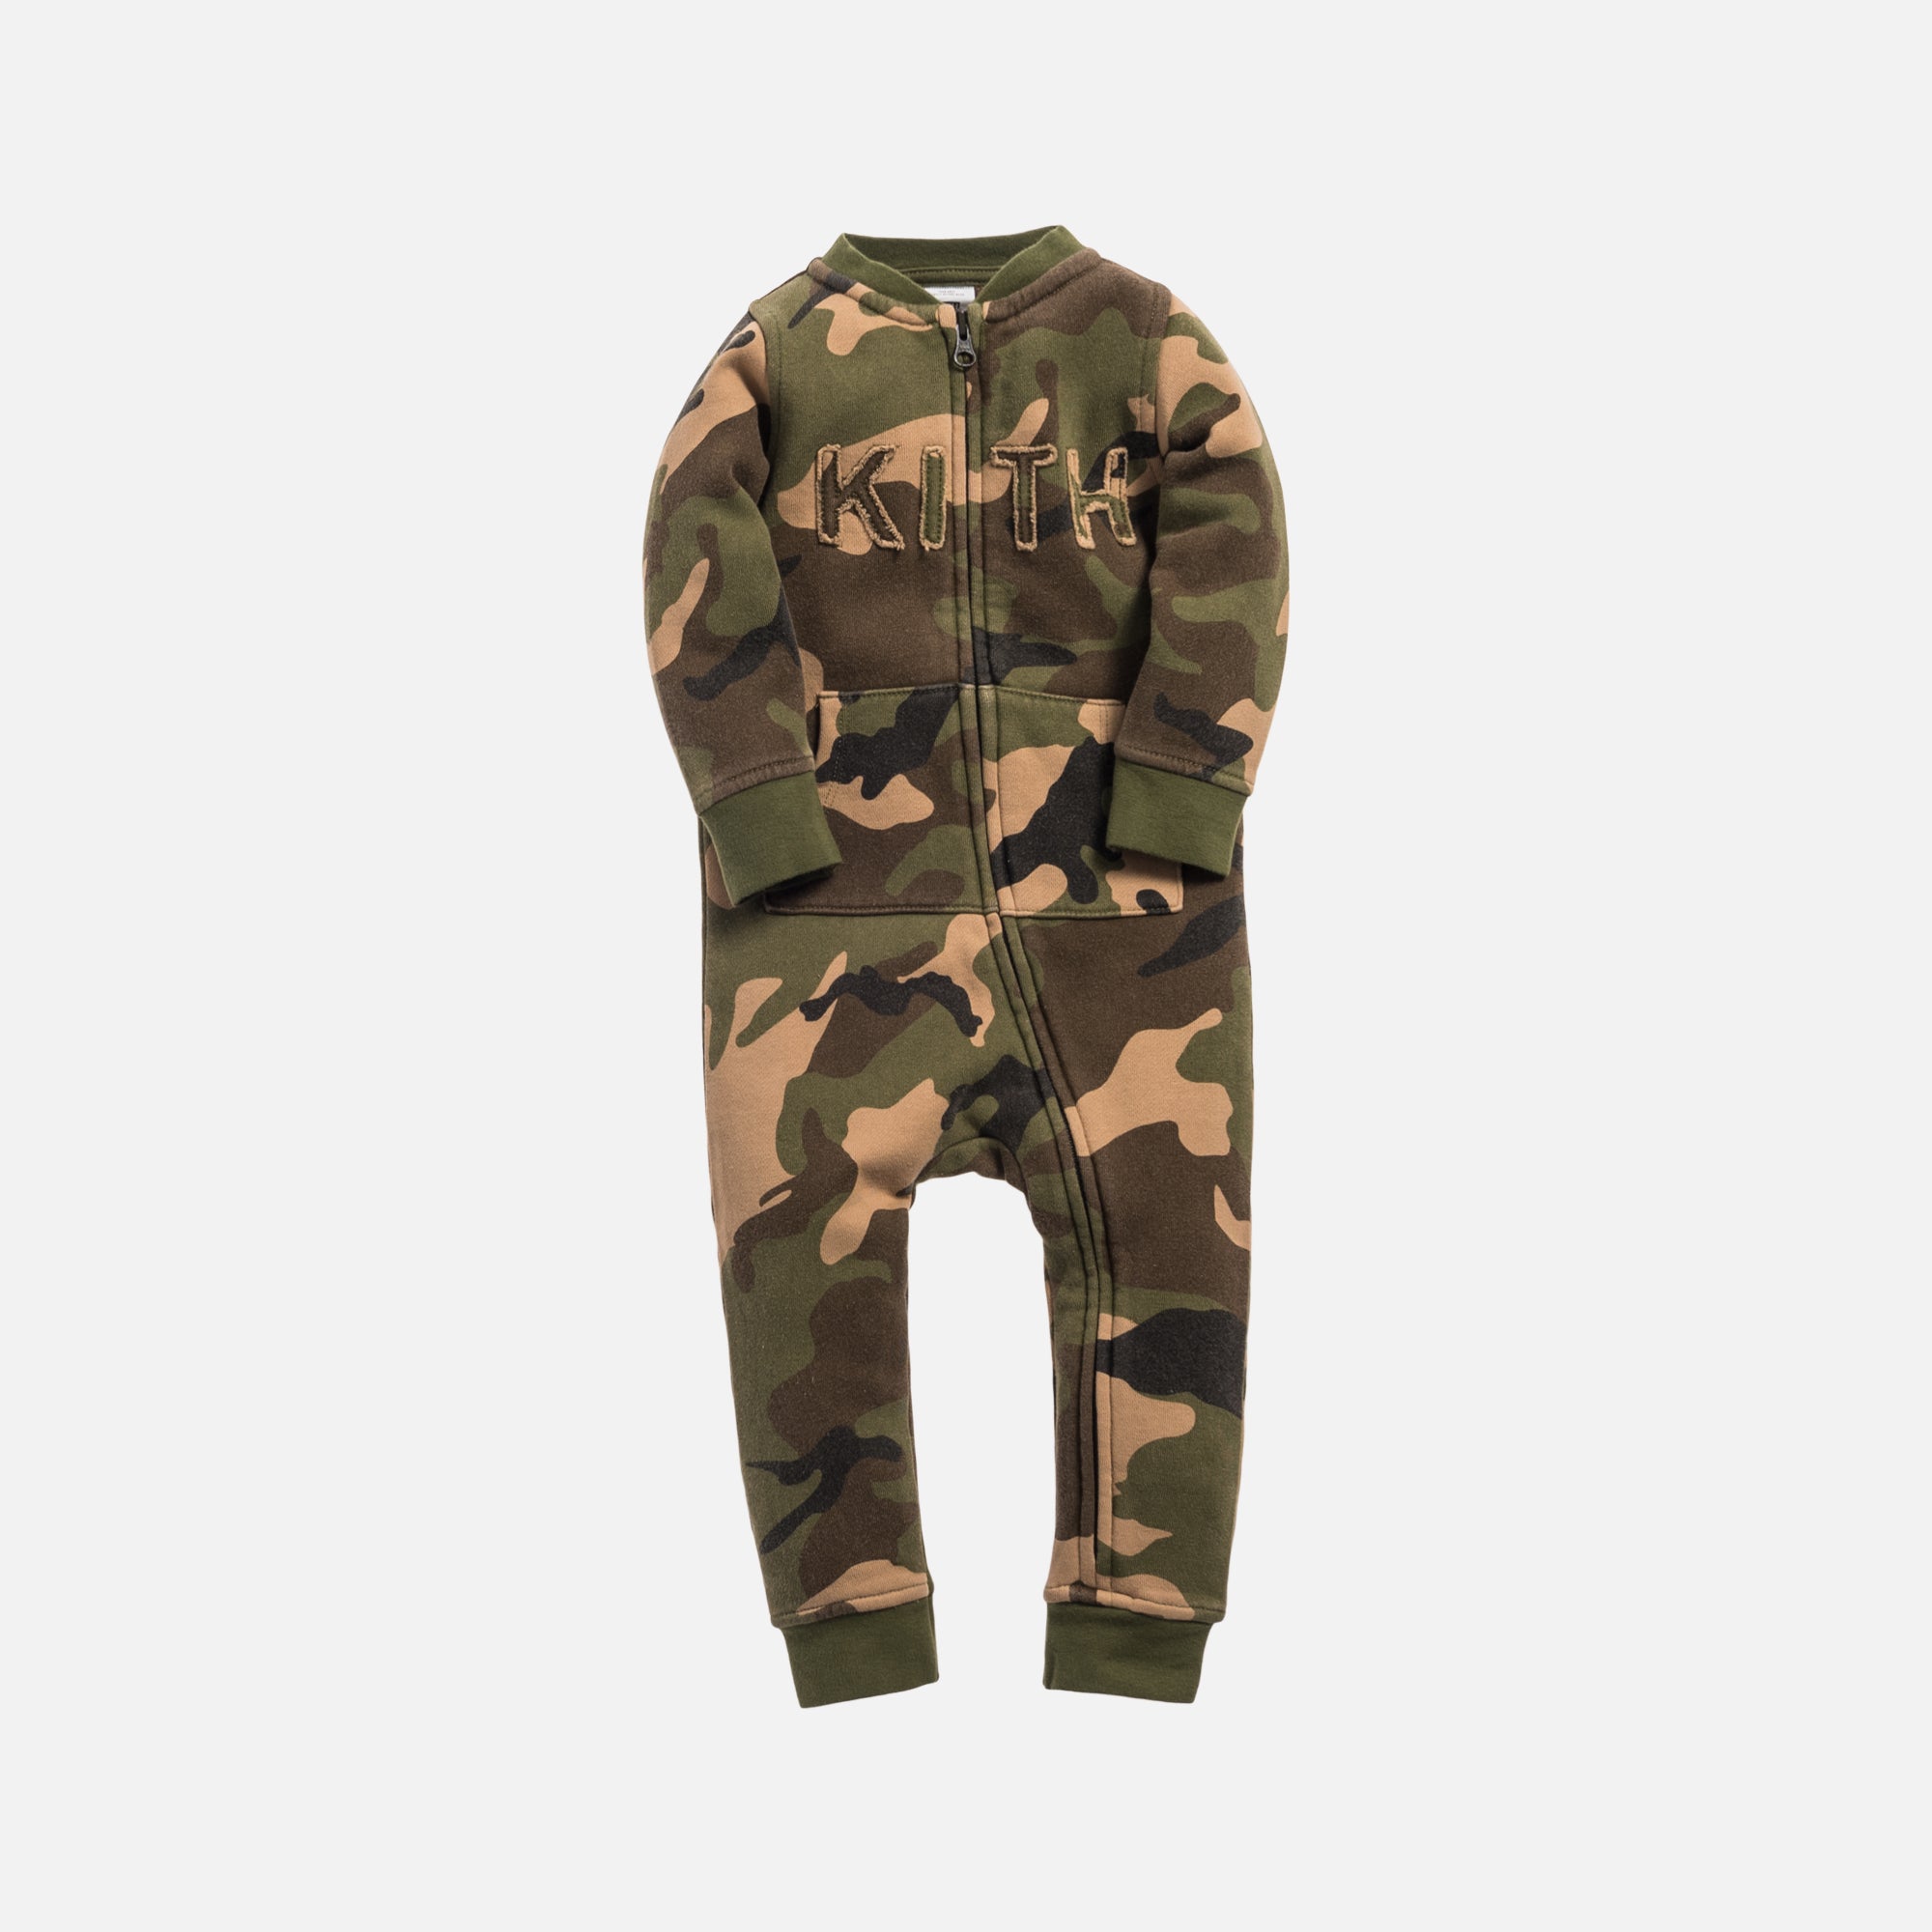 Kith Kids Toddlers Crew Coverall - Woodland Camo